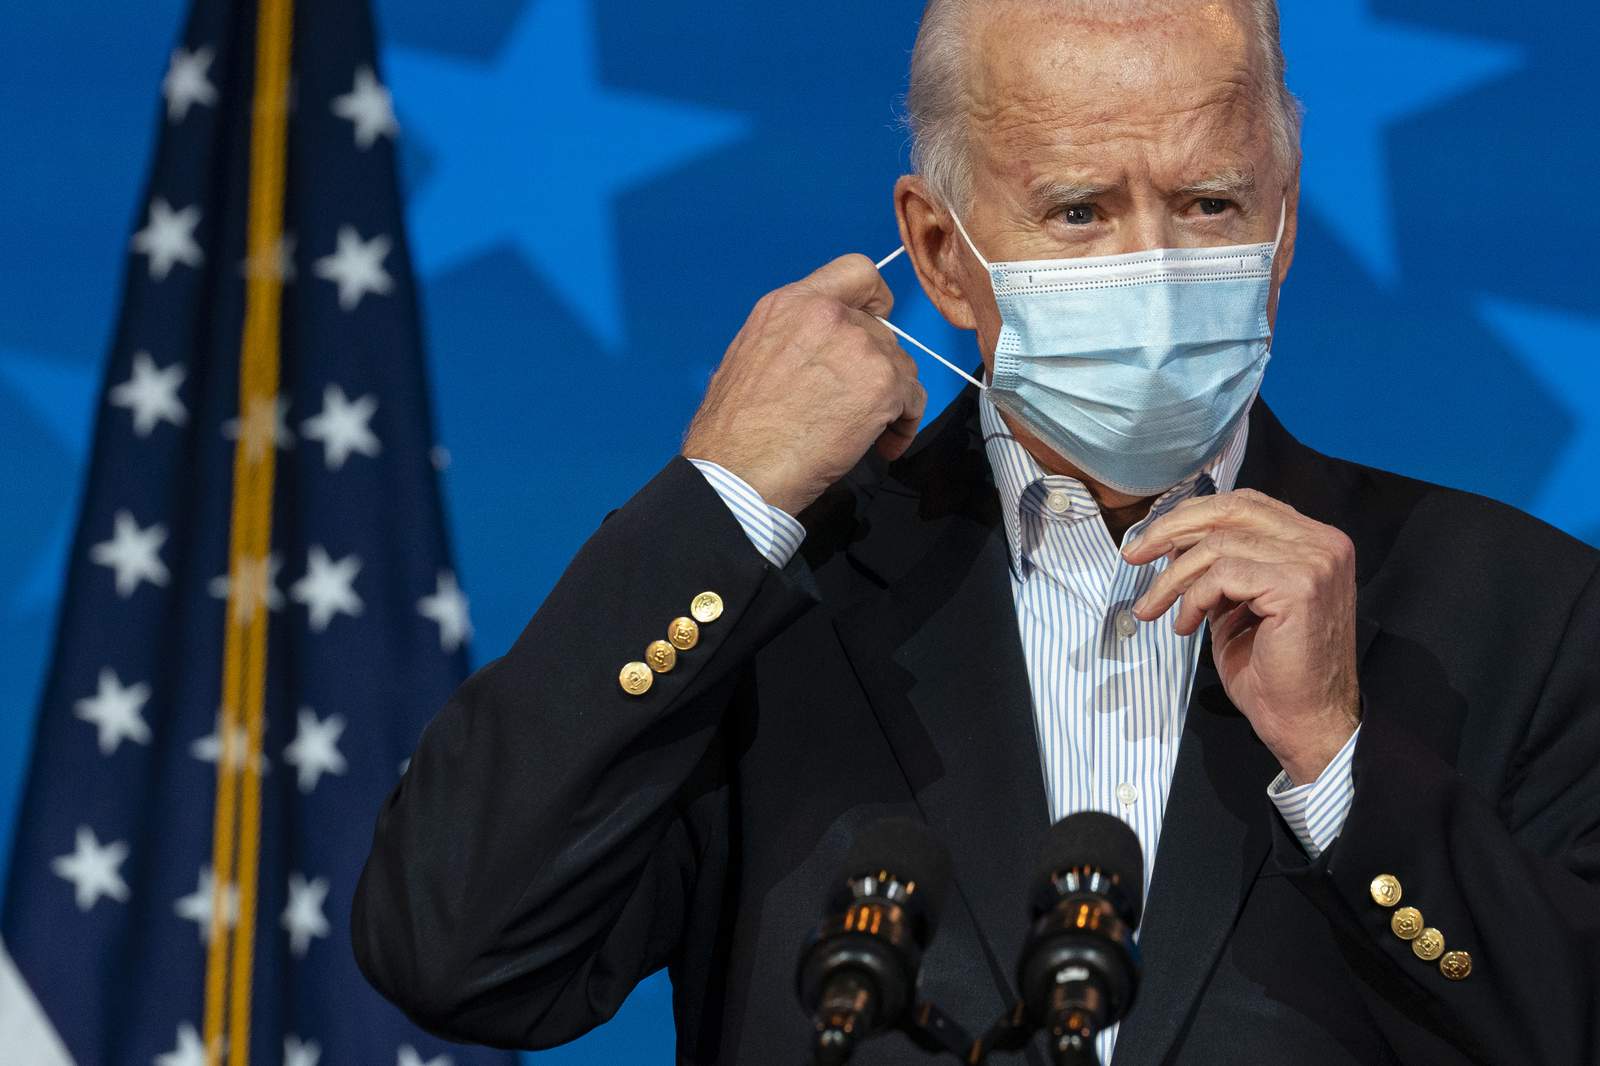 Biden’s prioritizing COVID-19 agenda is welcome news for doctor